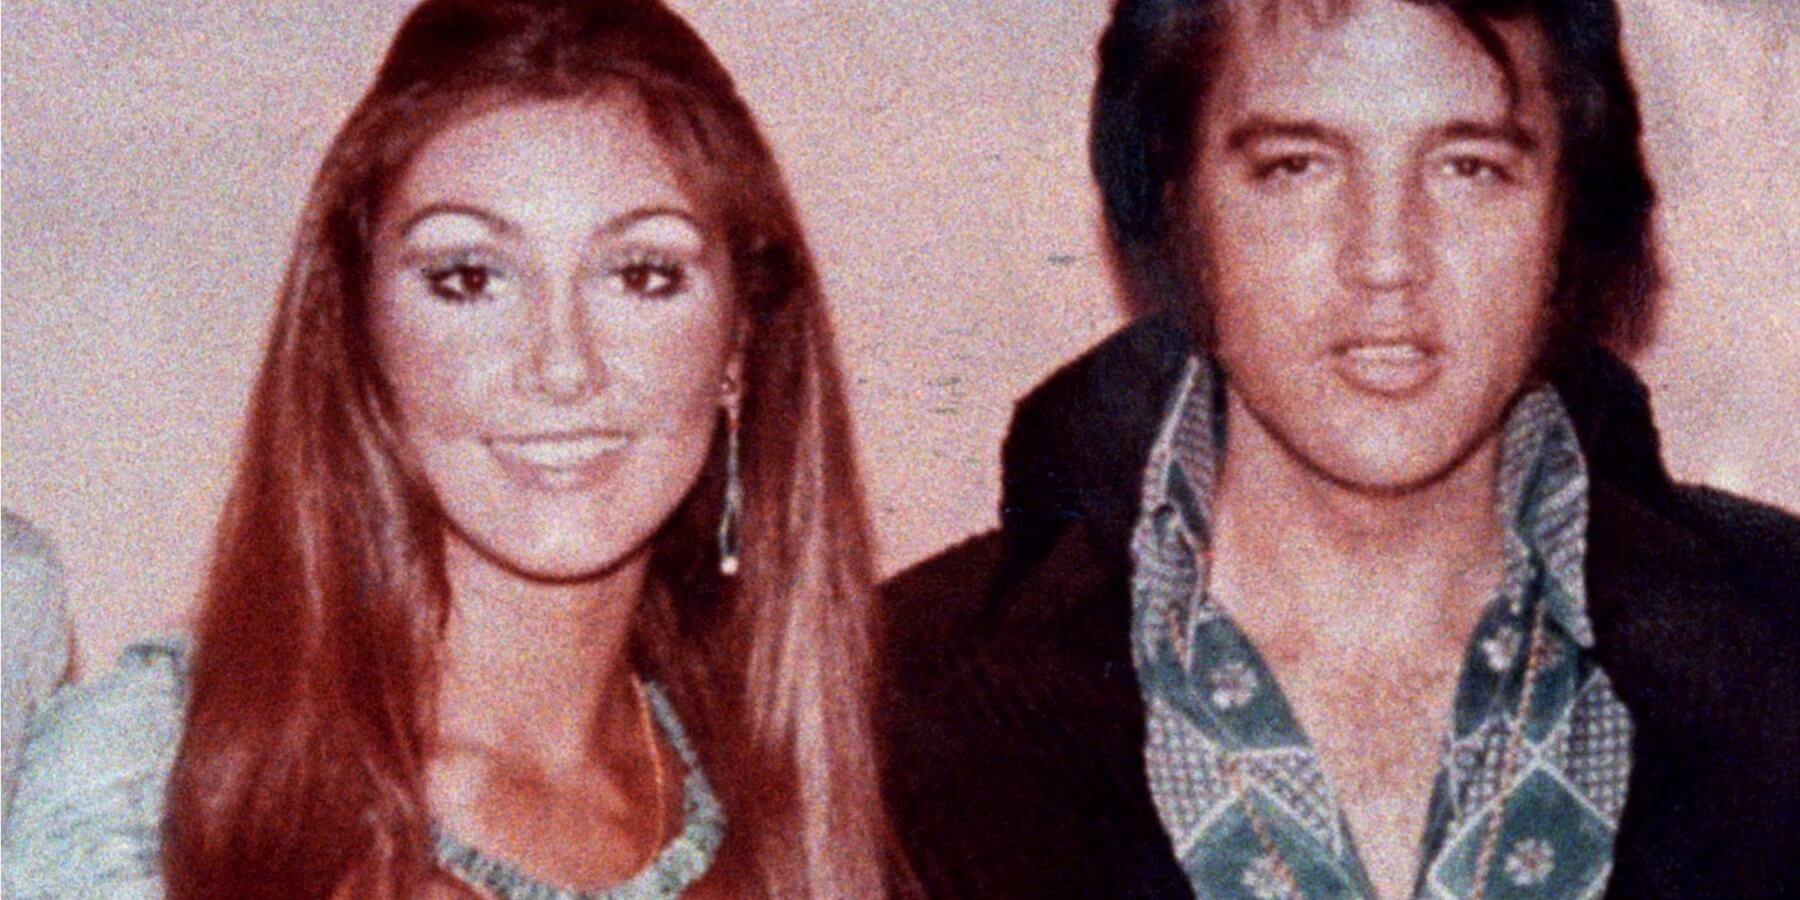 Linda Thompson and Elvis Presley photographed together in the early 1970s.